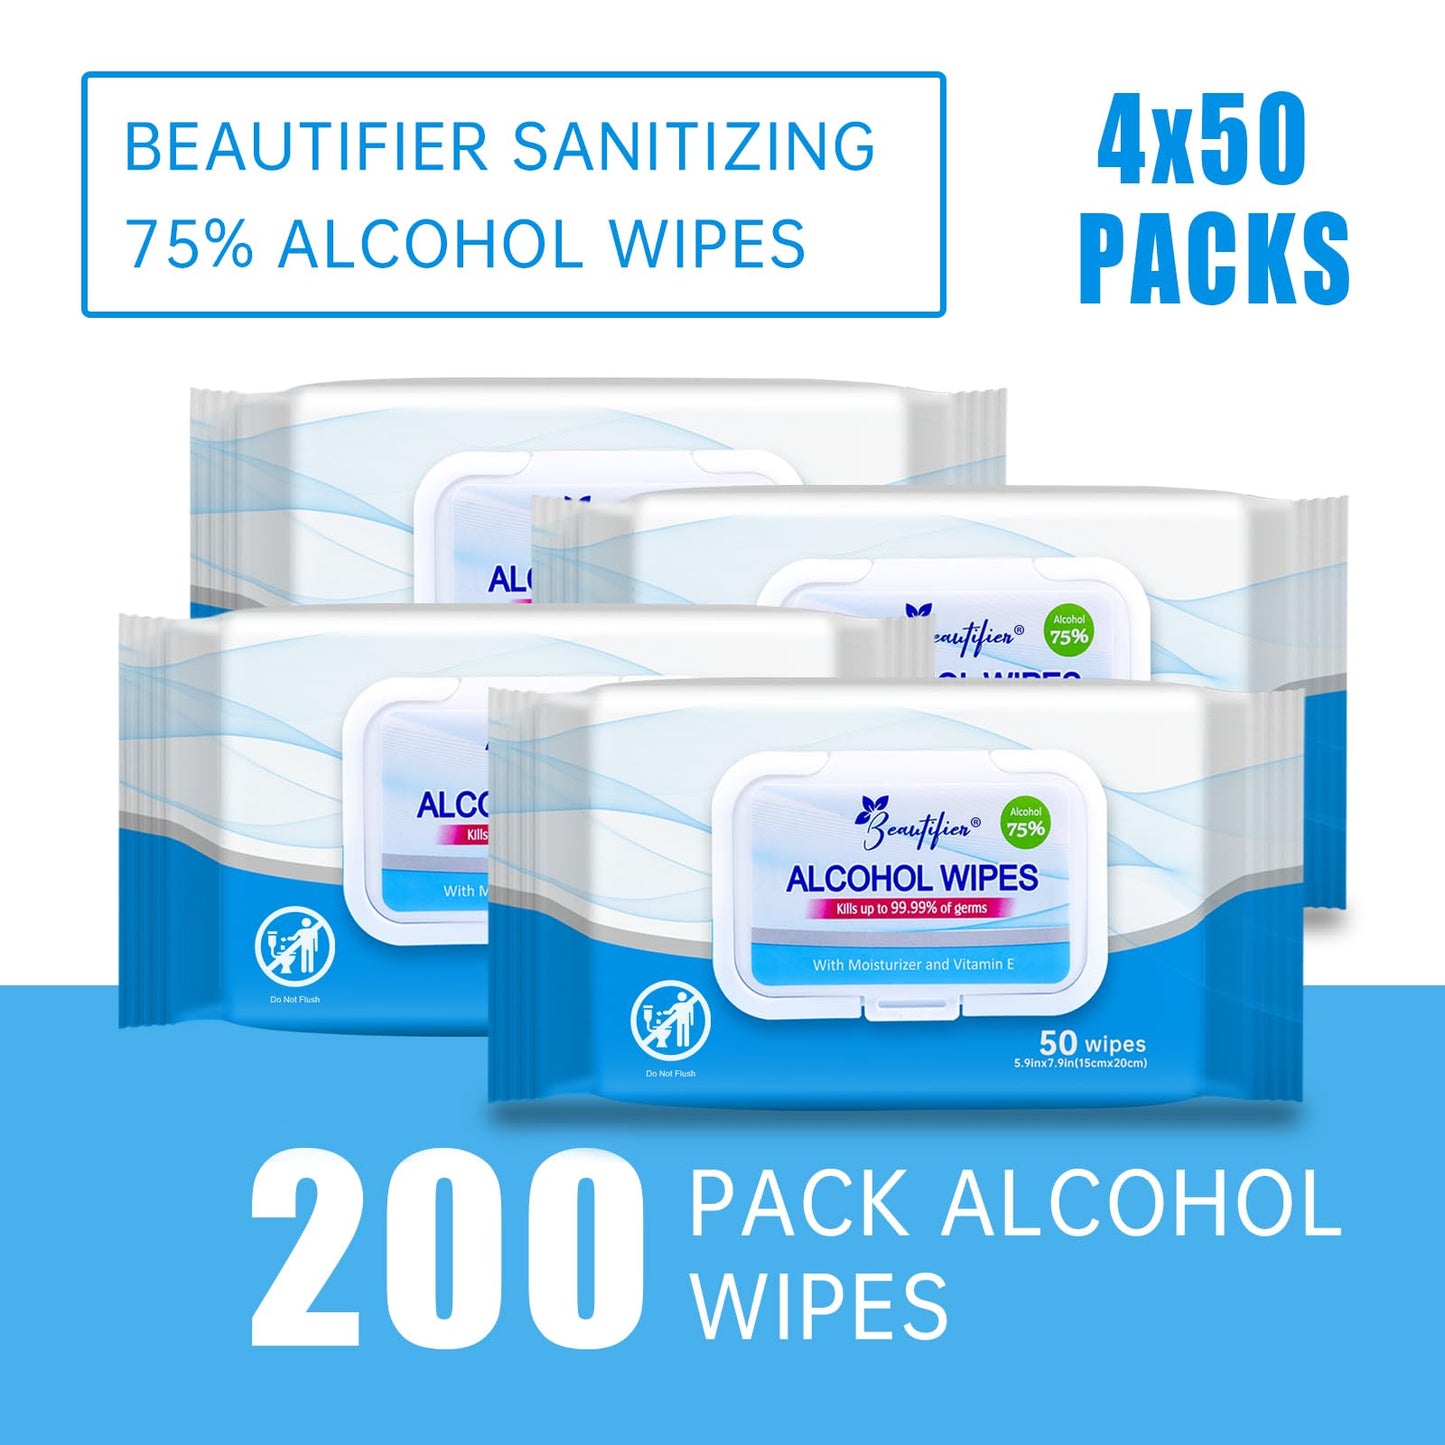 Beautifier Life Wet Wipes,Hand Sanitizer 75% Alcohol Wipes with Aloe and Vitamin E,200 Count